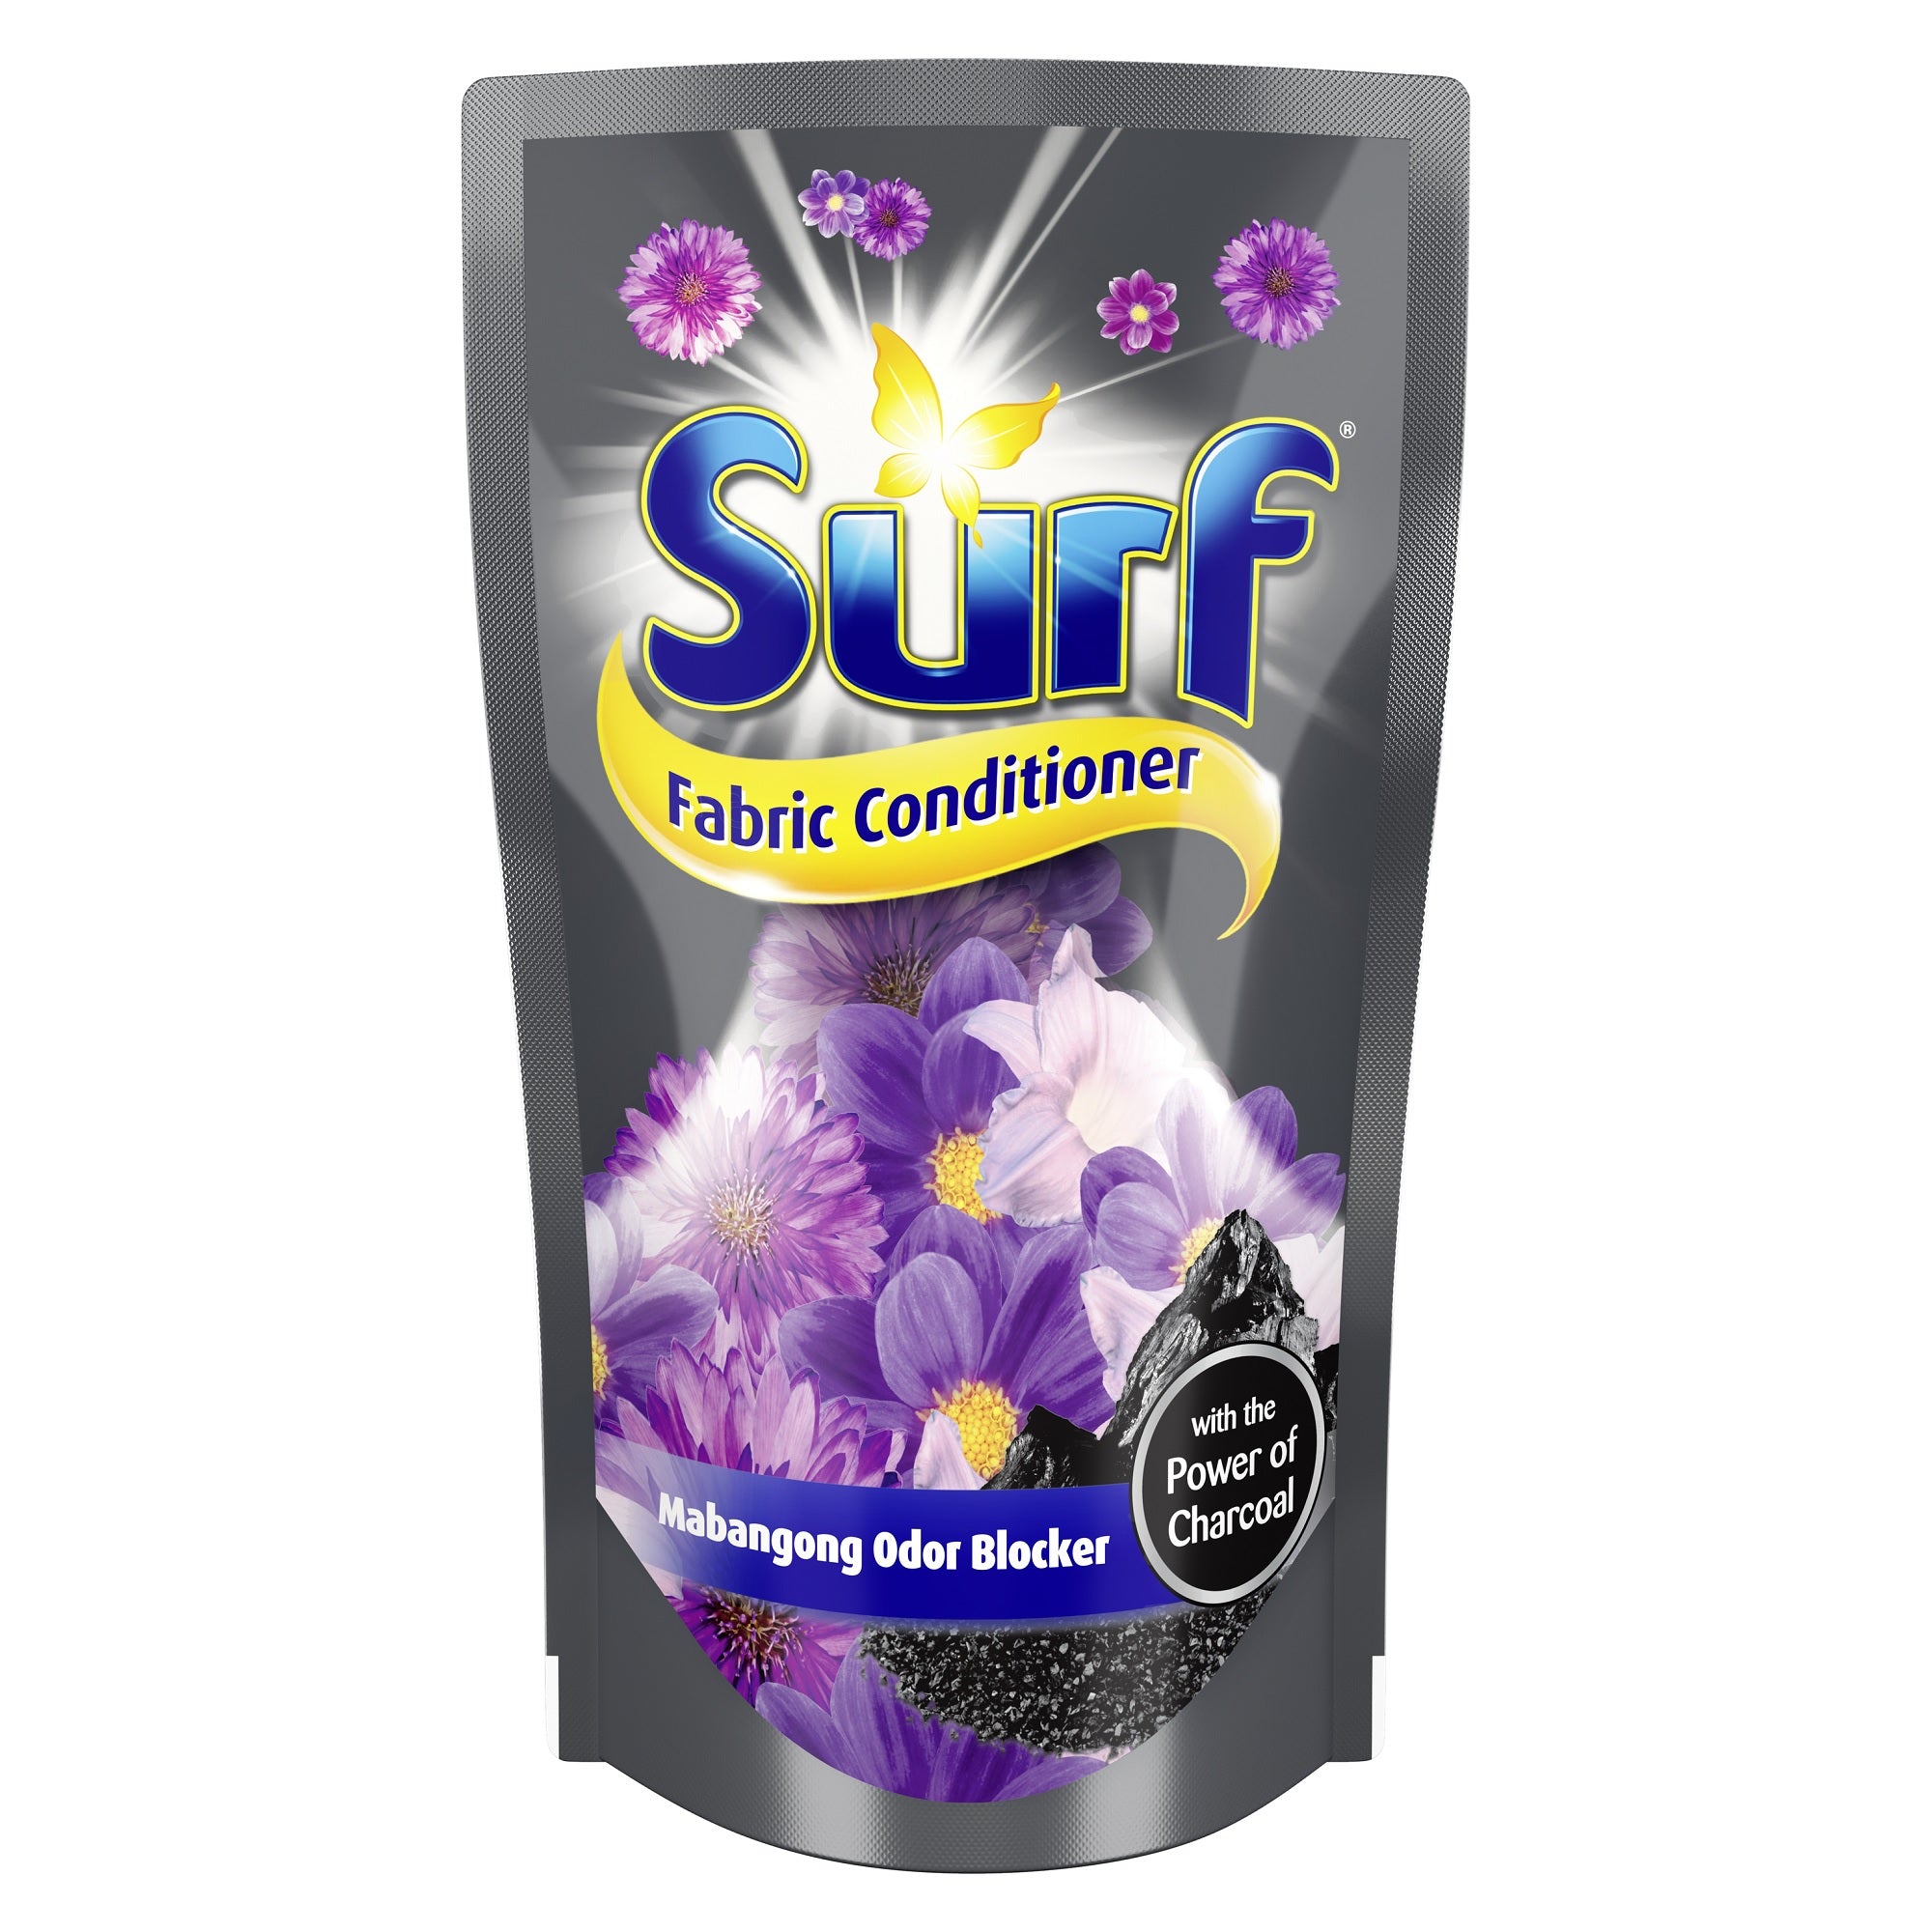 Surf Laundry Fabric Conditioner Charcoal Fresh 670ml